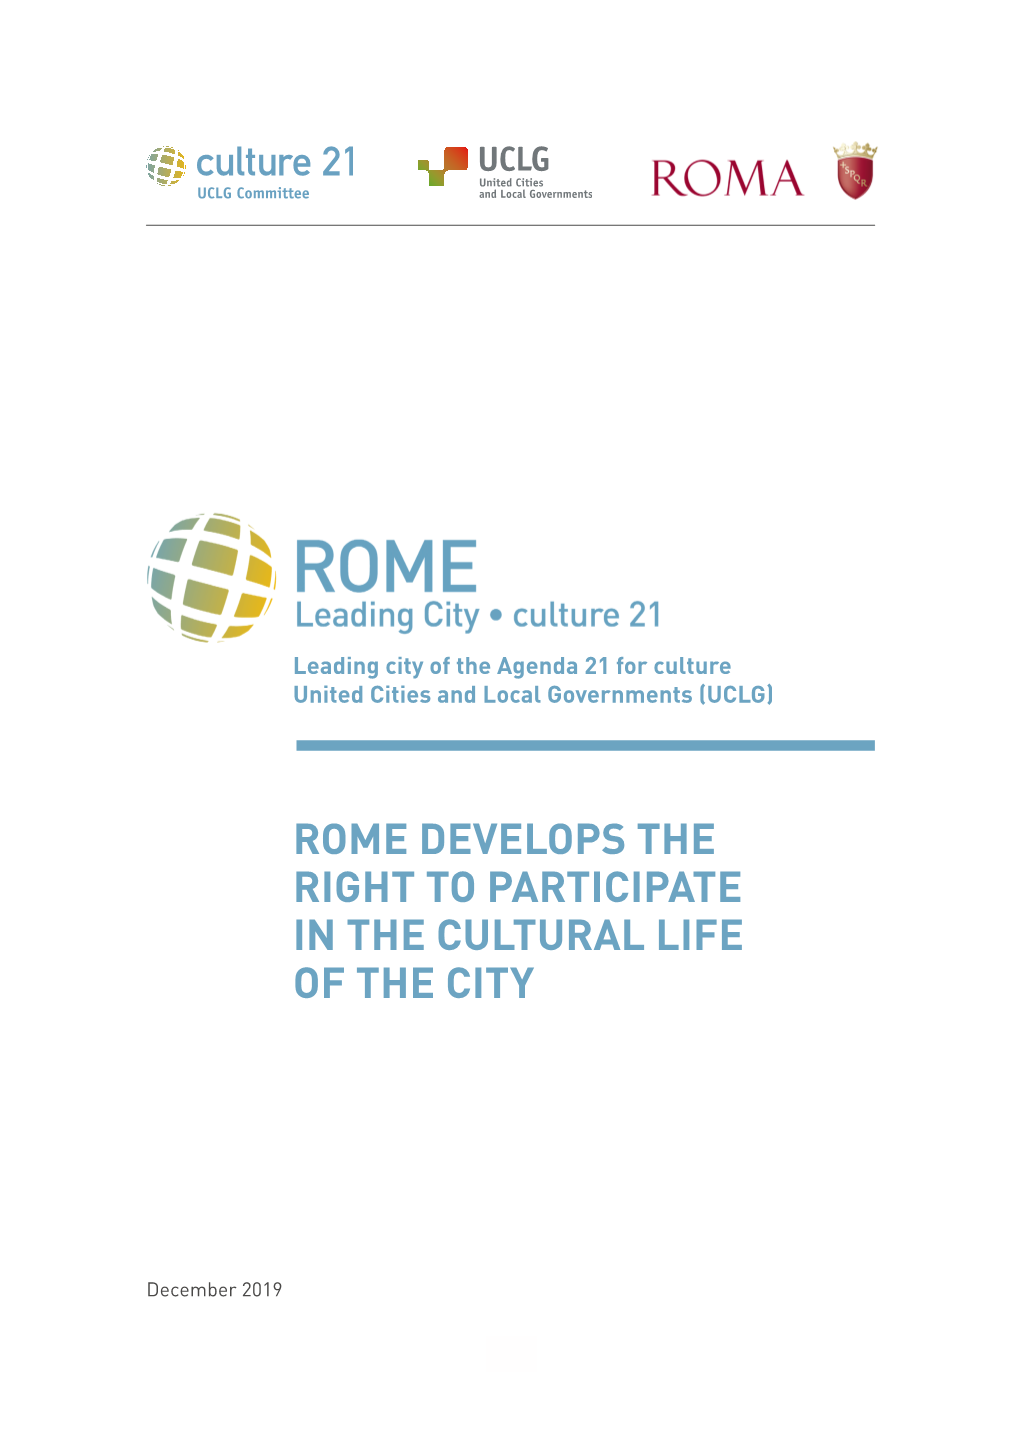 A. ROME Like So Many Capitals, Rome Has a Double Role of City and National Capital